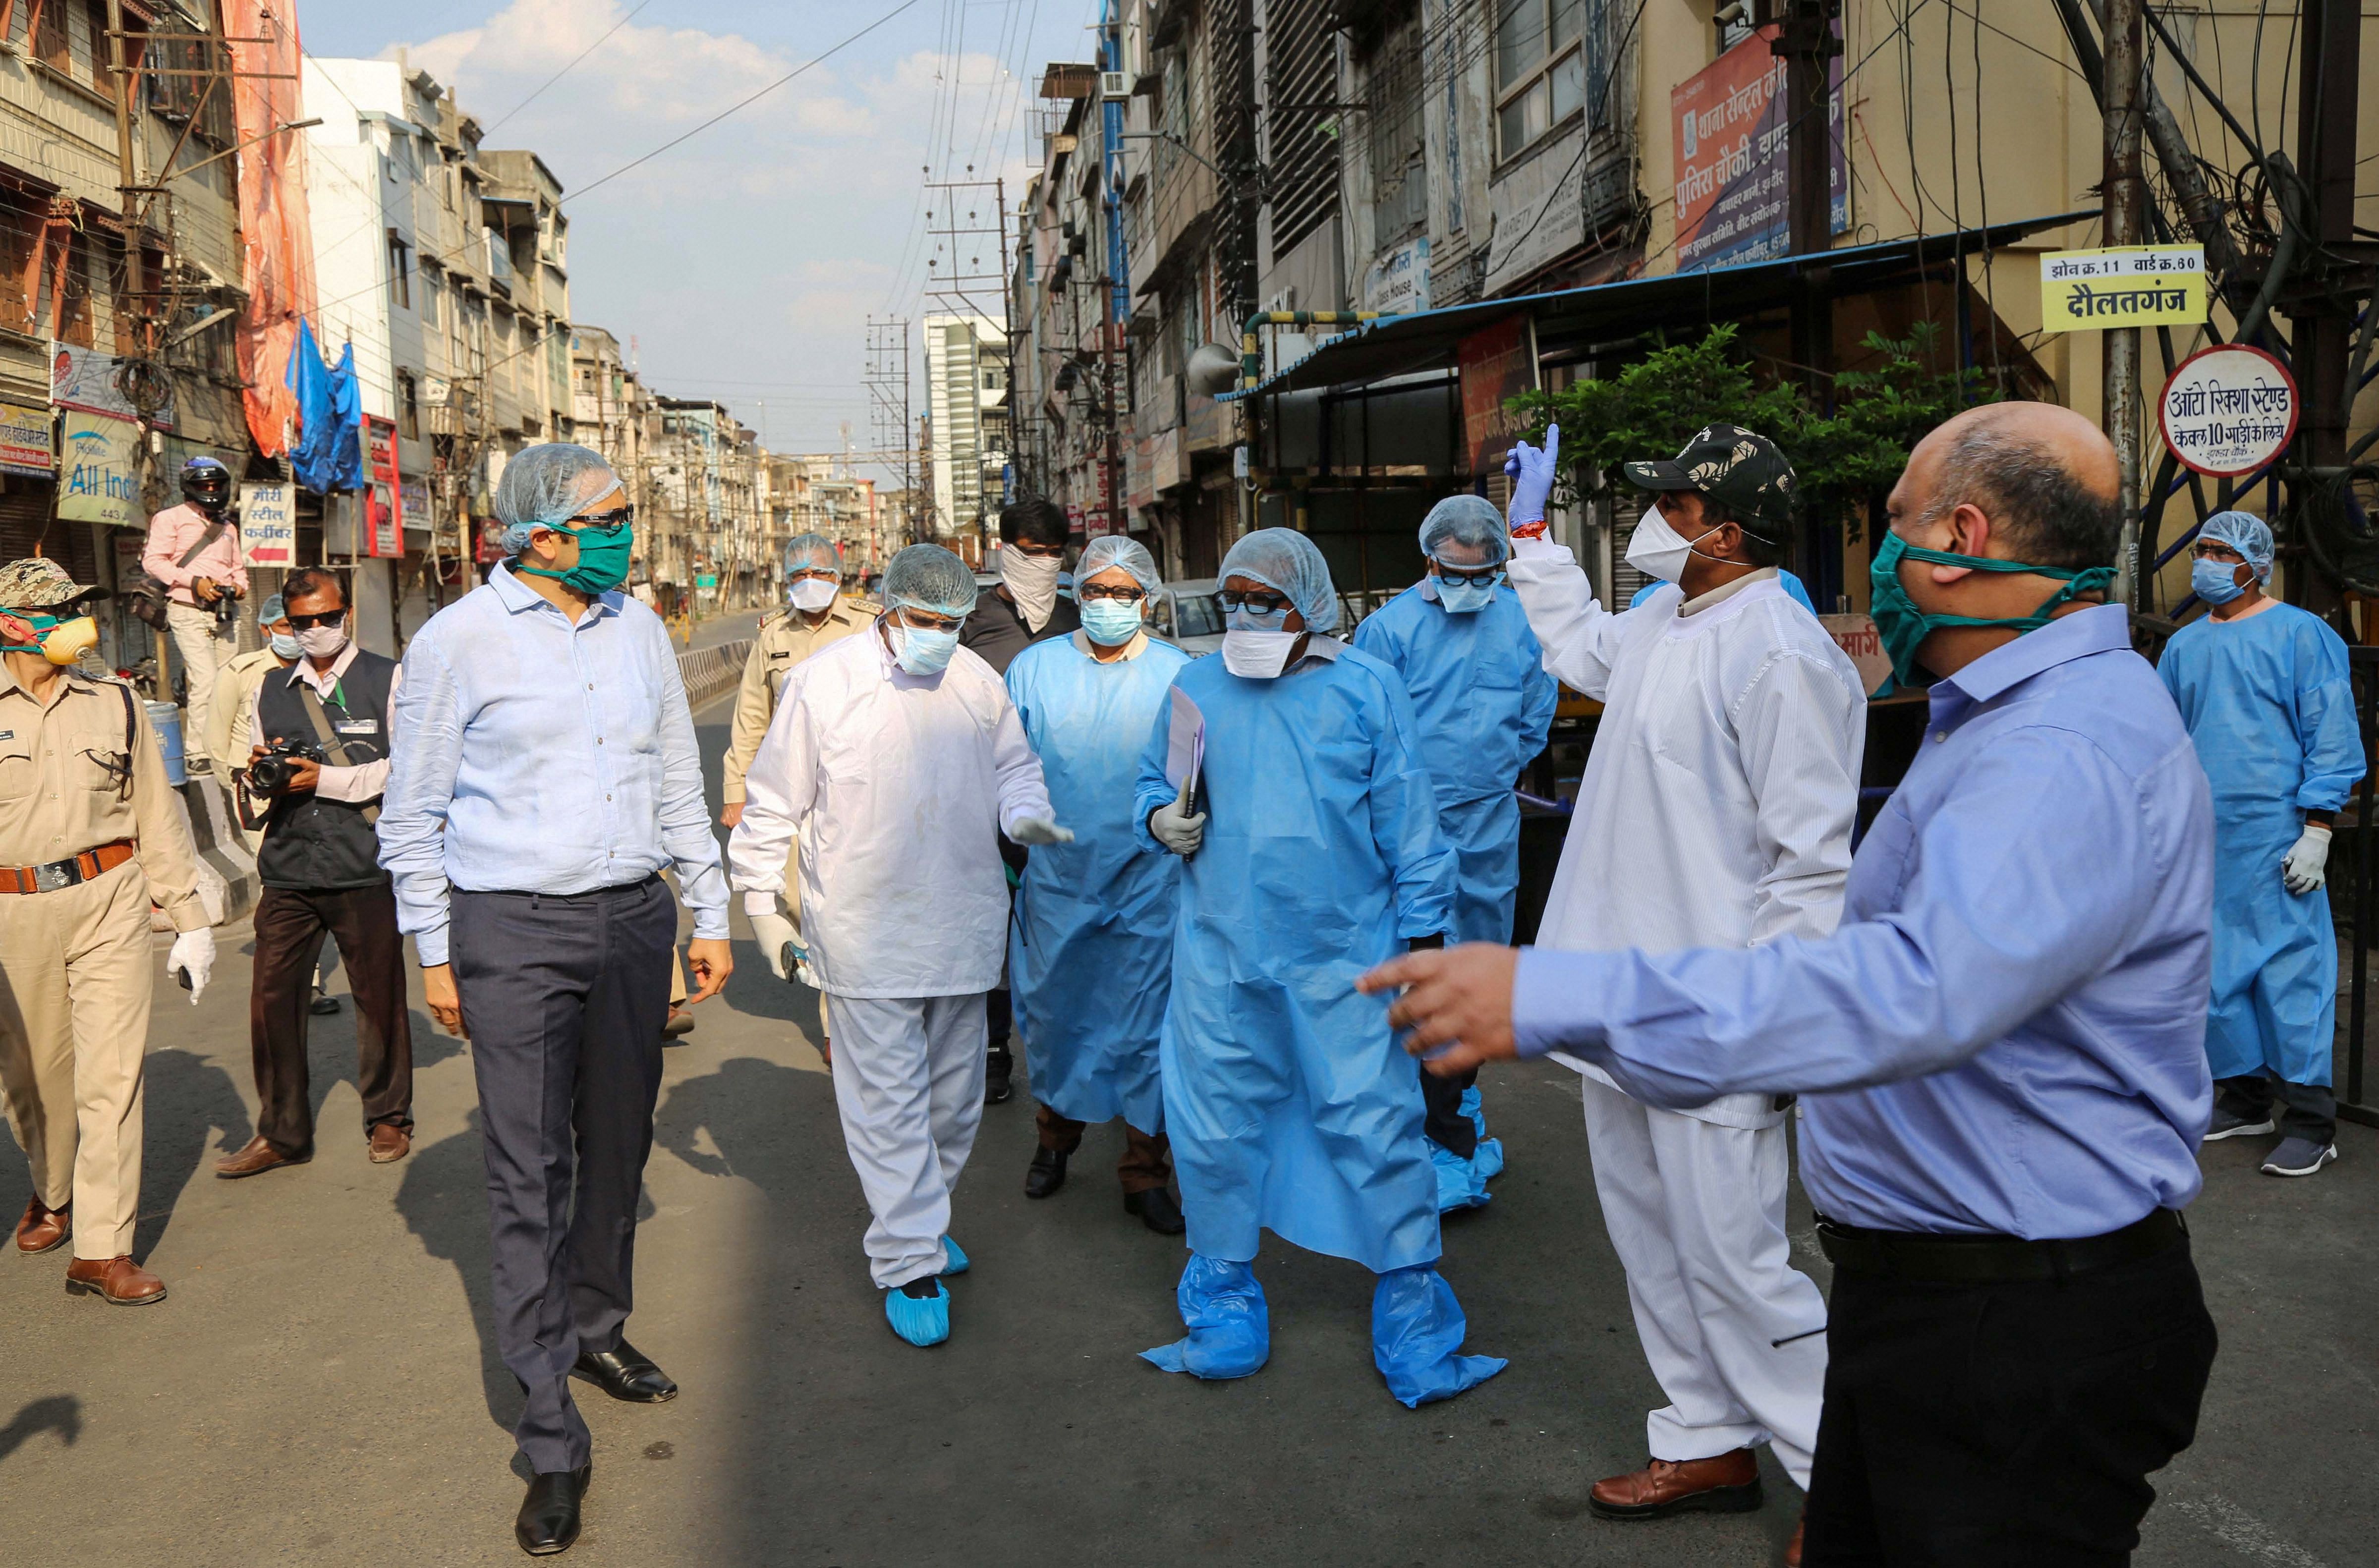 Indore is among the cities in the country worst hit by the virus outbreak, with 915 COVID-19 cases, and 52 deaths from the infection. (Credit: PTI Photo)